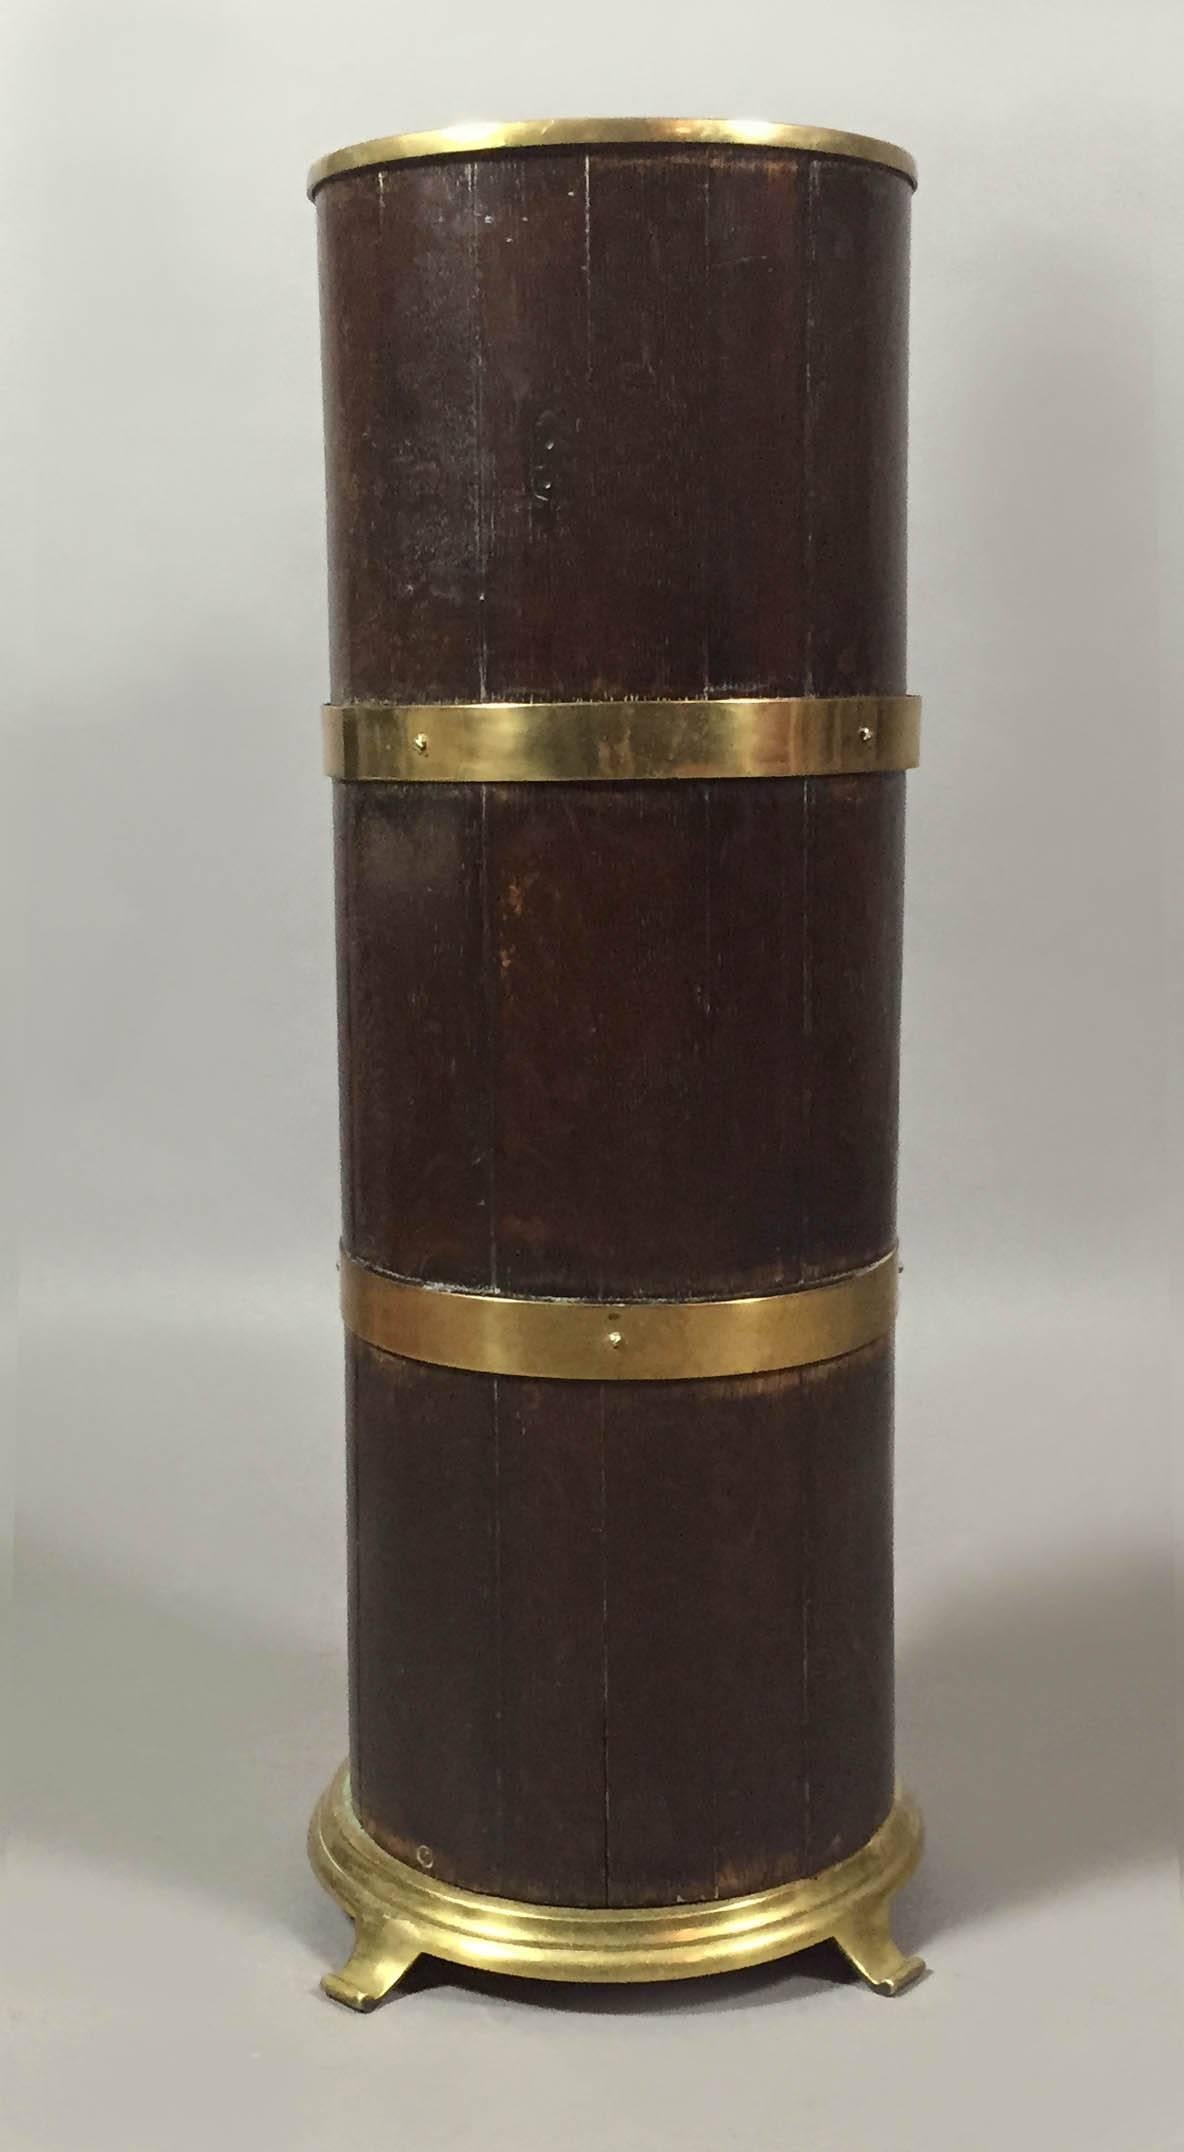 Cylindrical form with pieces of mahogany arranged vertically and two horizontal brass bands.